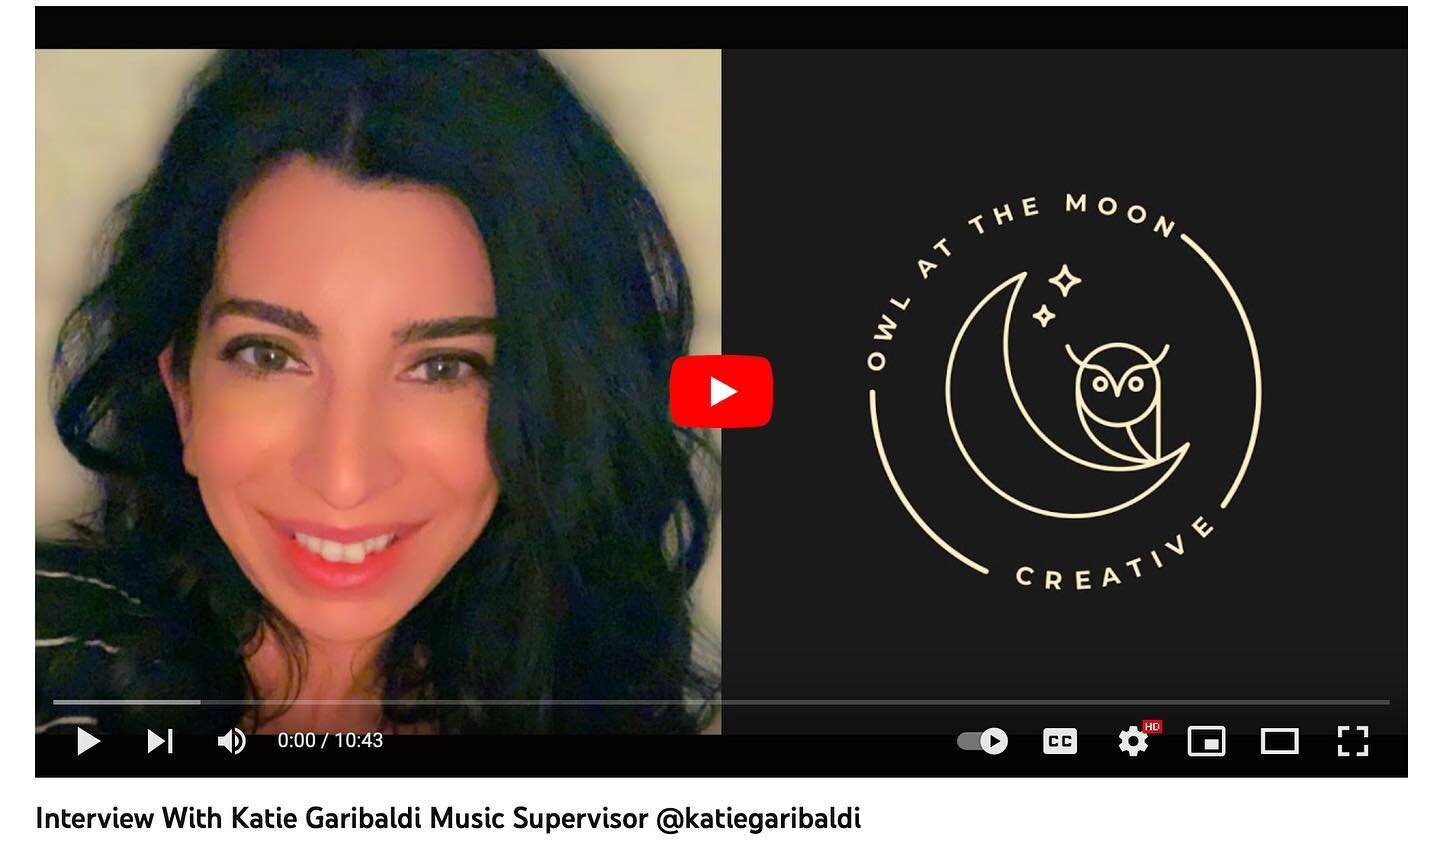 A couple weeks ago I was interviewed by film festival director @mikel.fair about working as an independent music supervisor. We discuss the misperceptions of the role, different scenarios of master use licenses, working with composers, and clearance 